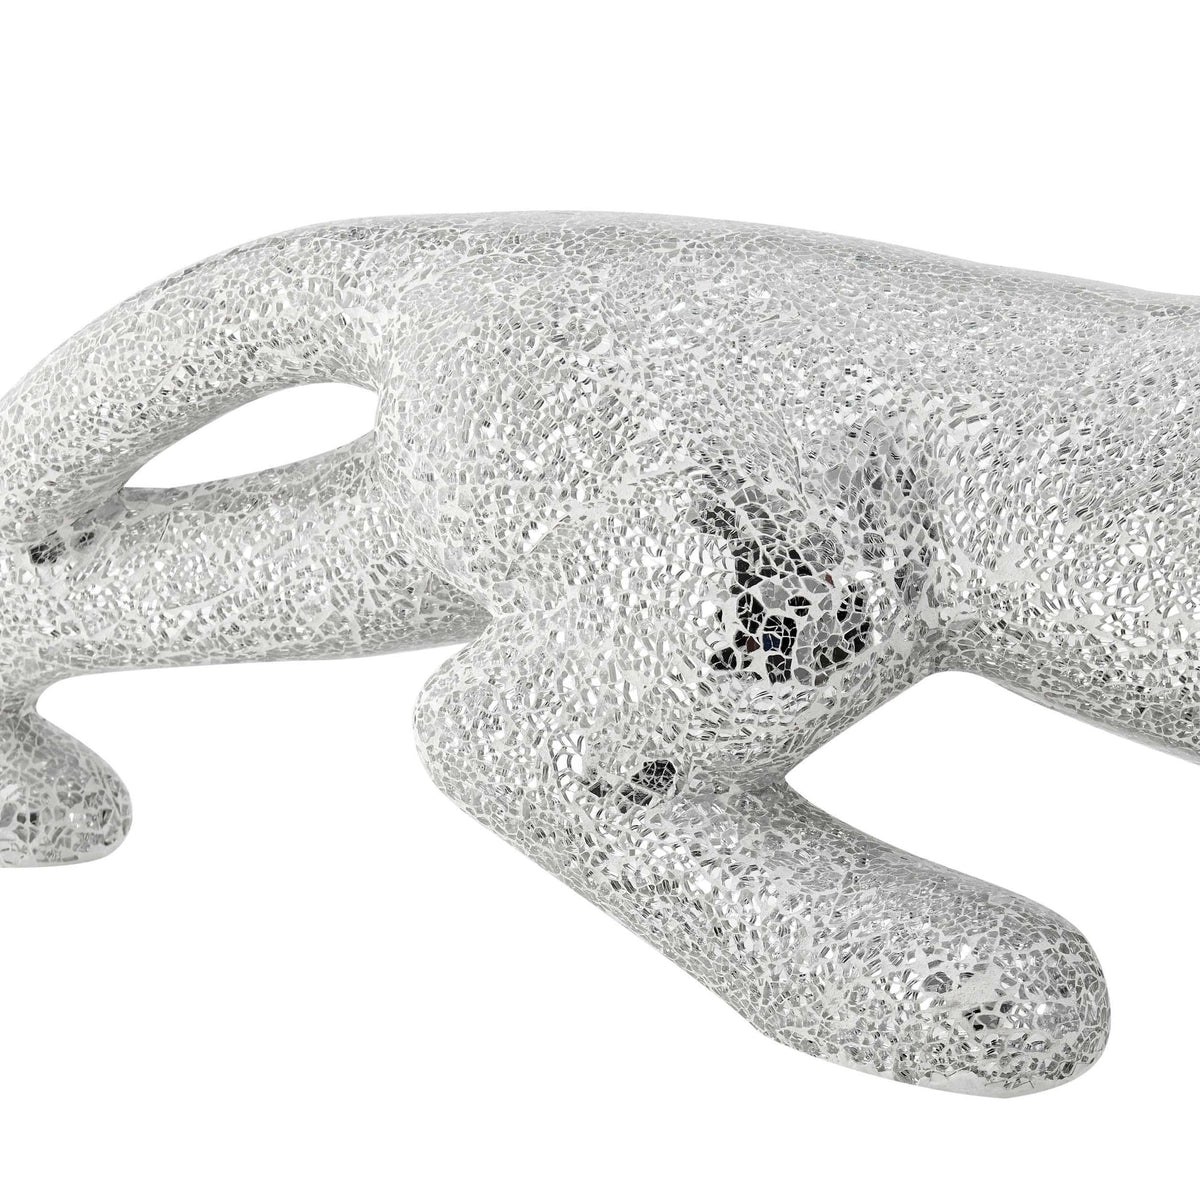 Boli Panther Sculpture // Glass and Chrome